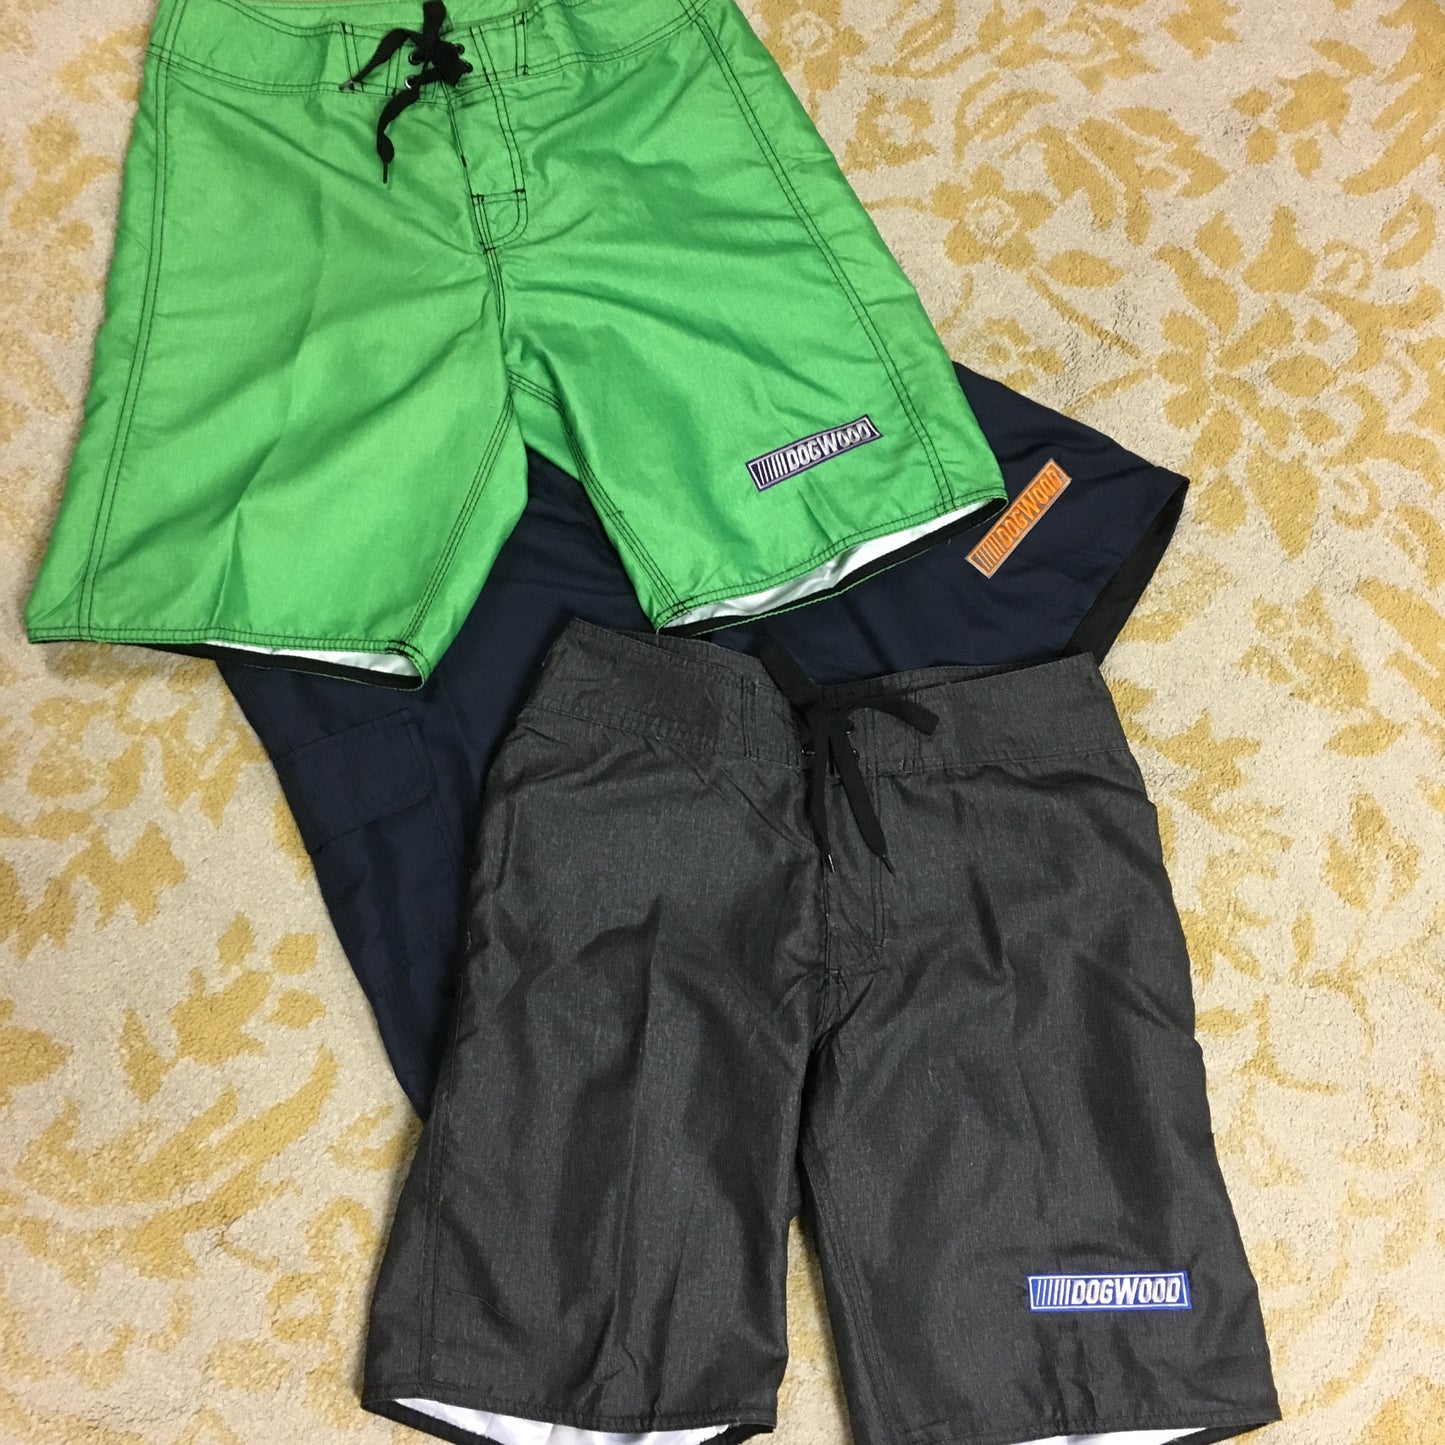 Speed Wave Shorts (size & color options listed)